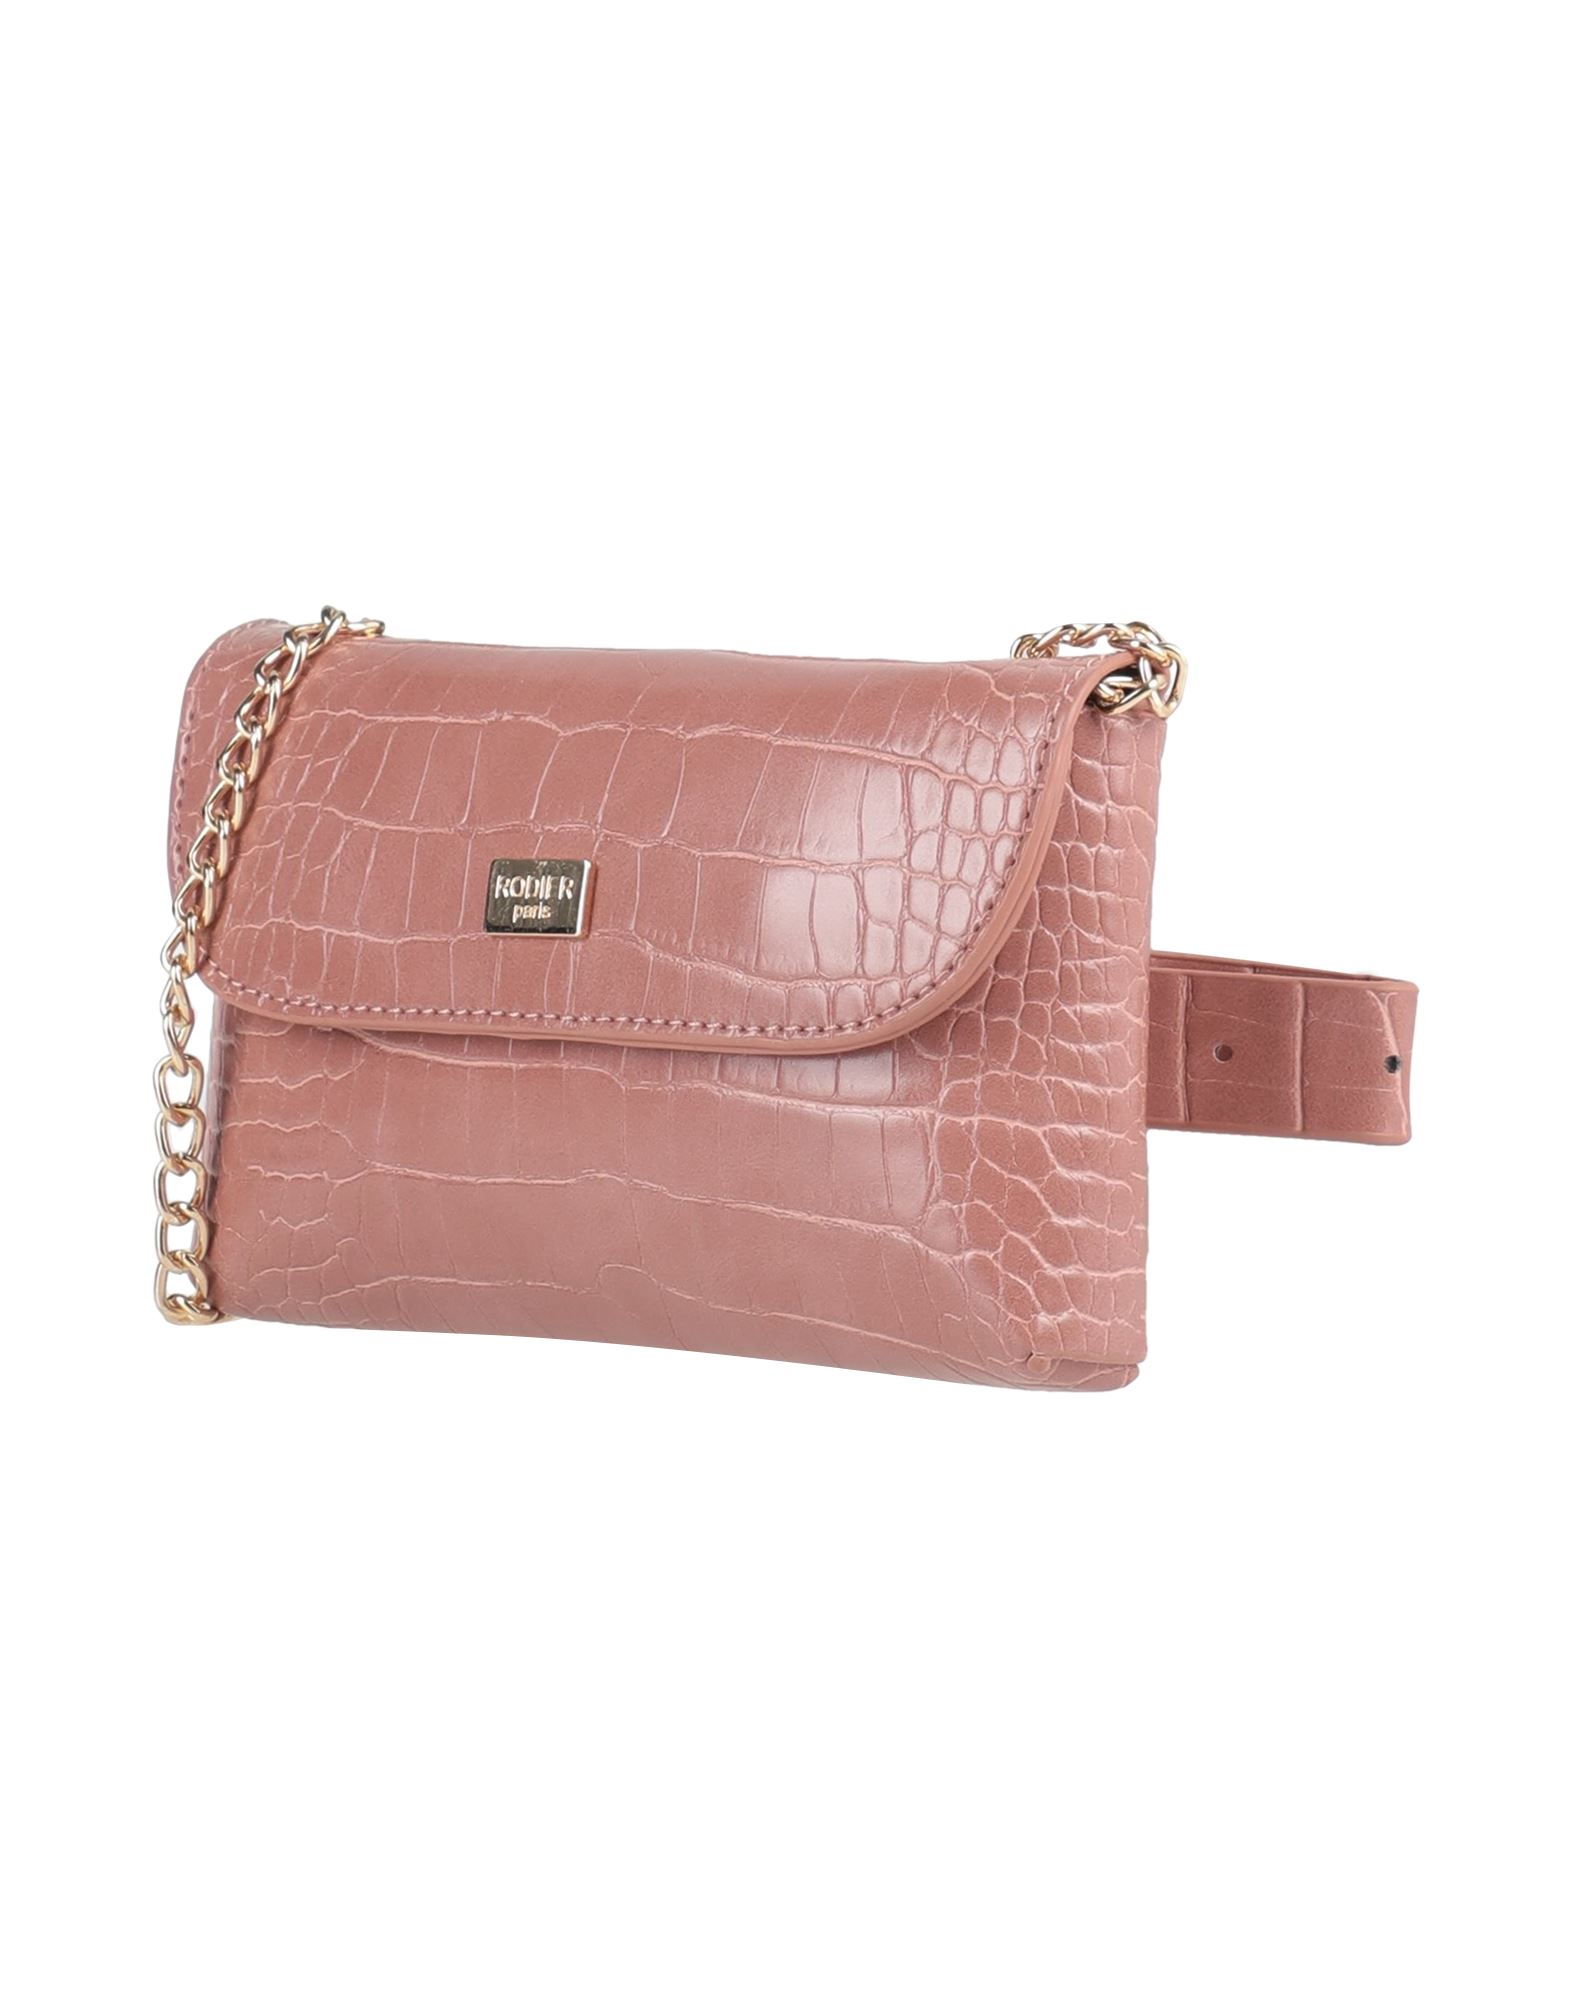 Rodier Bum Bags In Pastel Pink